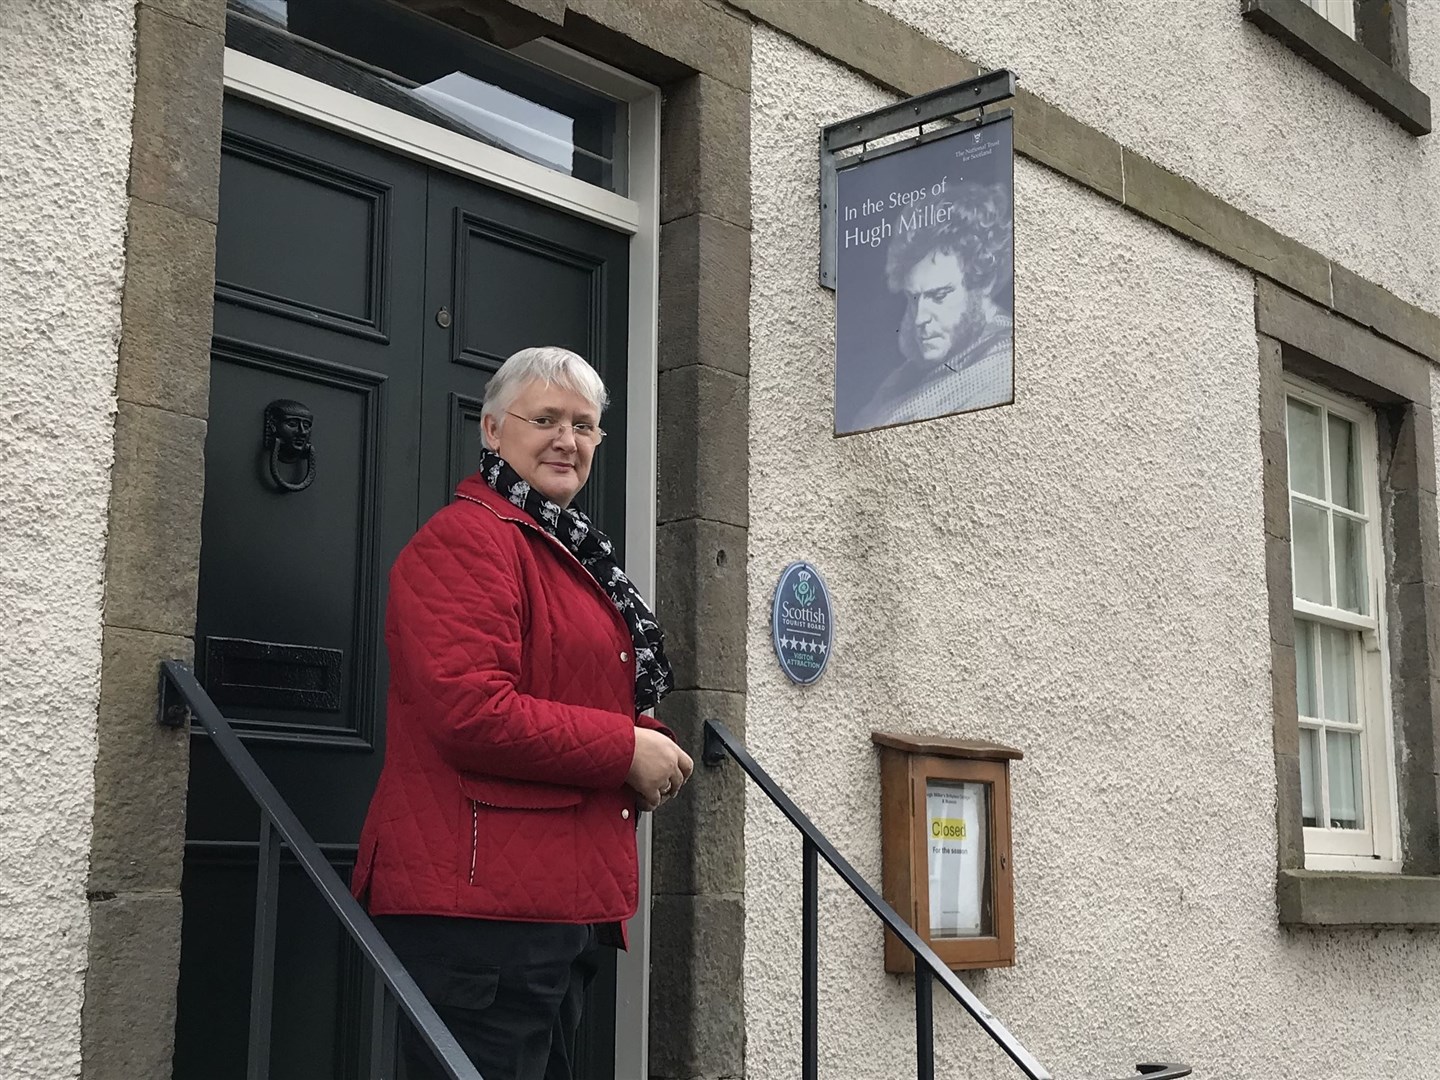 Dr Alix Powers-Jones outside the entrance to Hugh Miller's Birthplace Cottage and Museum.